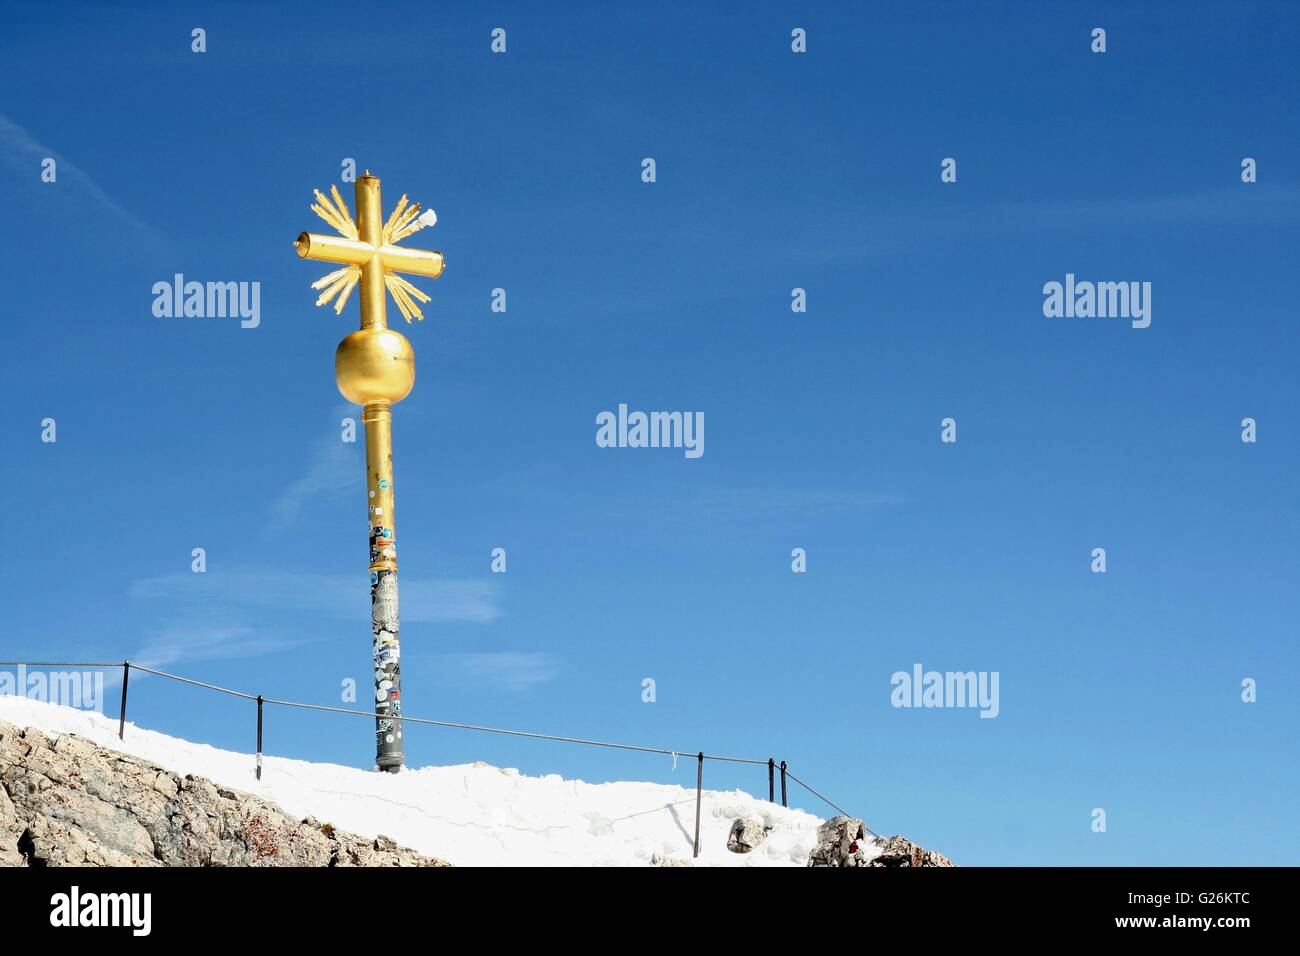 Gold cross marking the summit, Zugspitze, the highest peak in Germany.  The cross stands against a blue sky. Stock Photo